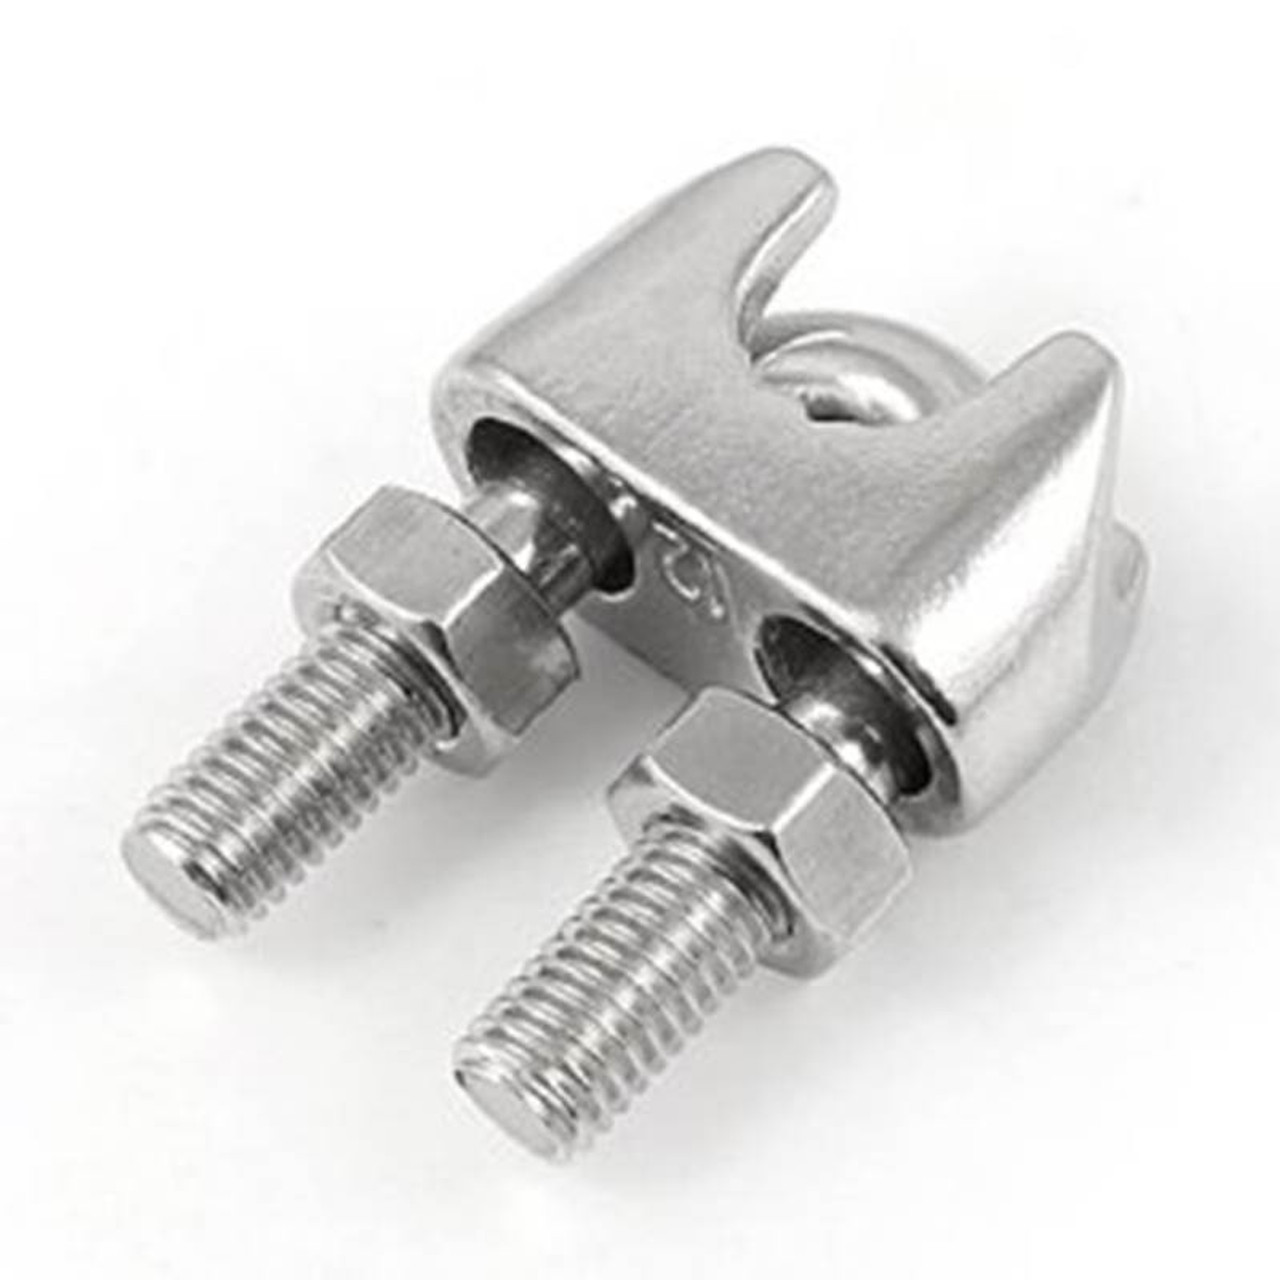 IMPA 233654 WIRE ROPE CLIP 4mm STAINLESS STEEL AISI-316